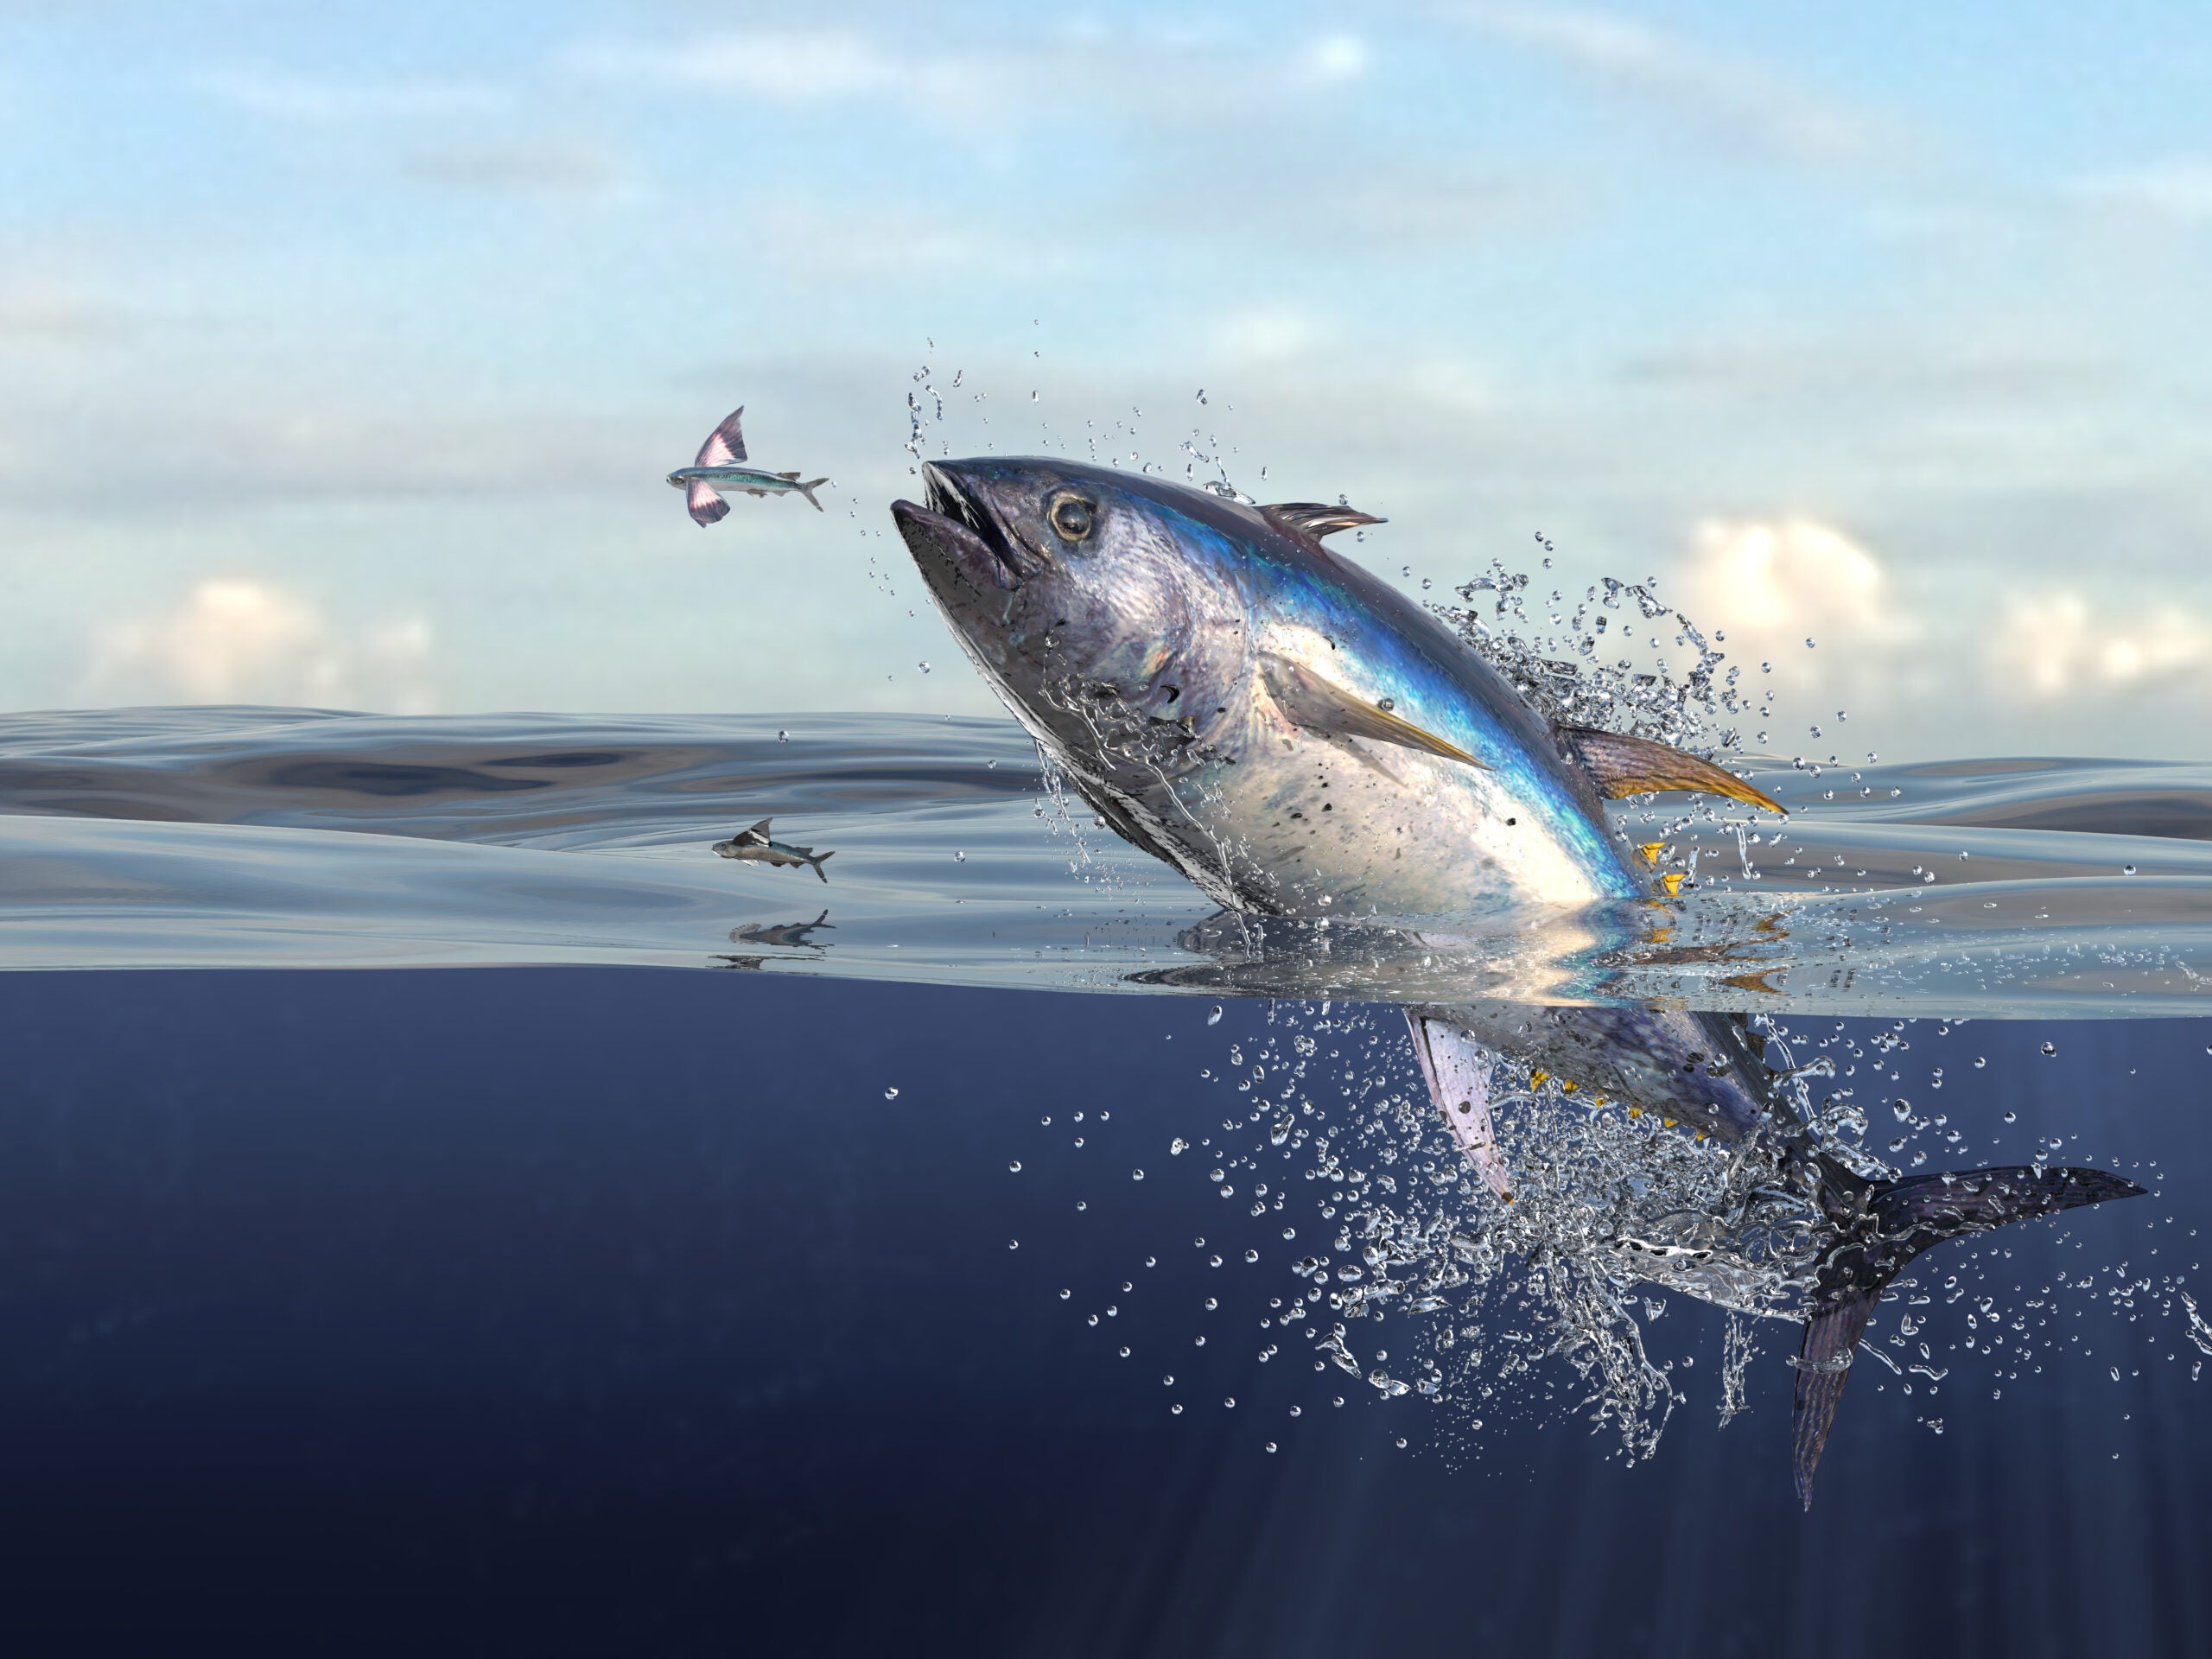 bluefin tuna jumps out of water after a flying fish